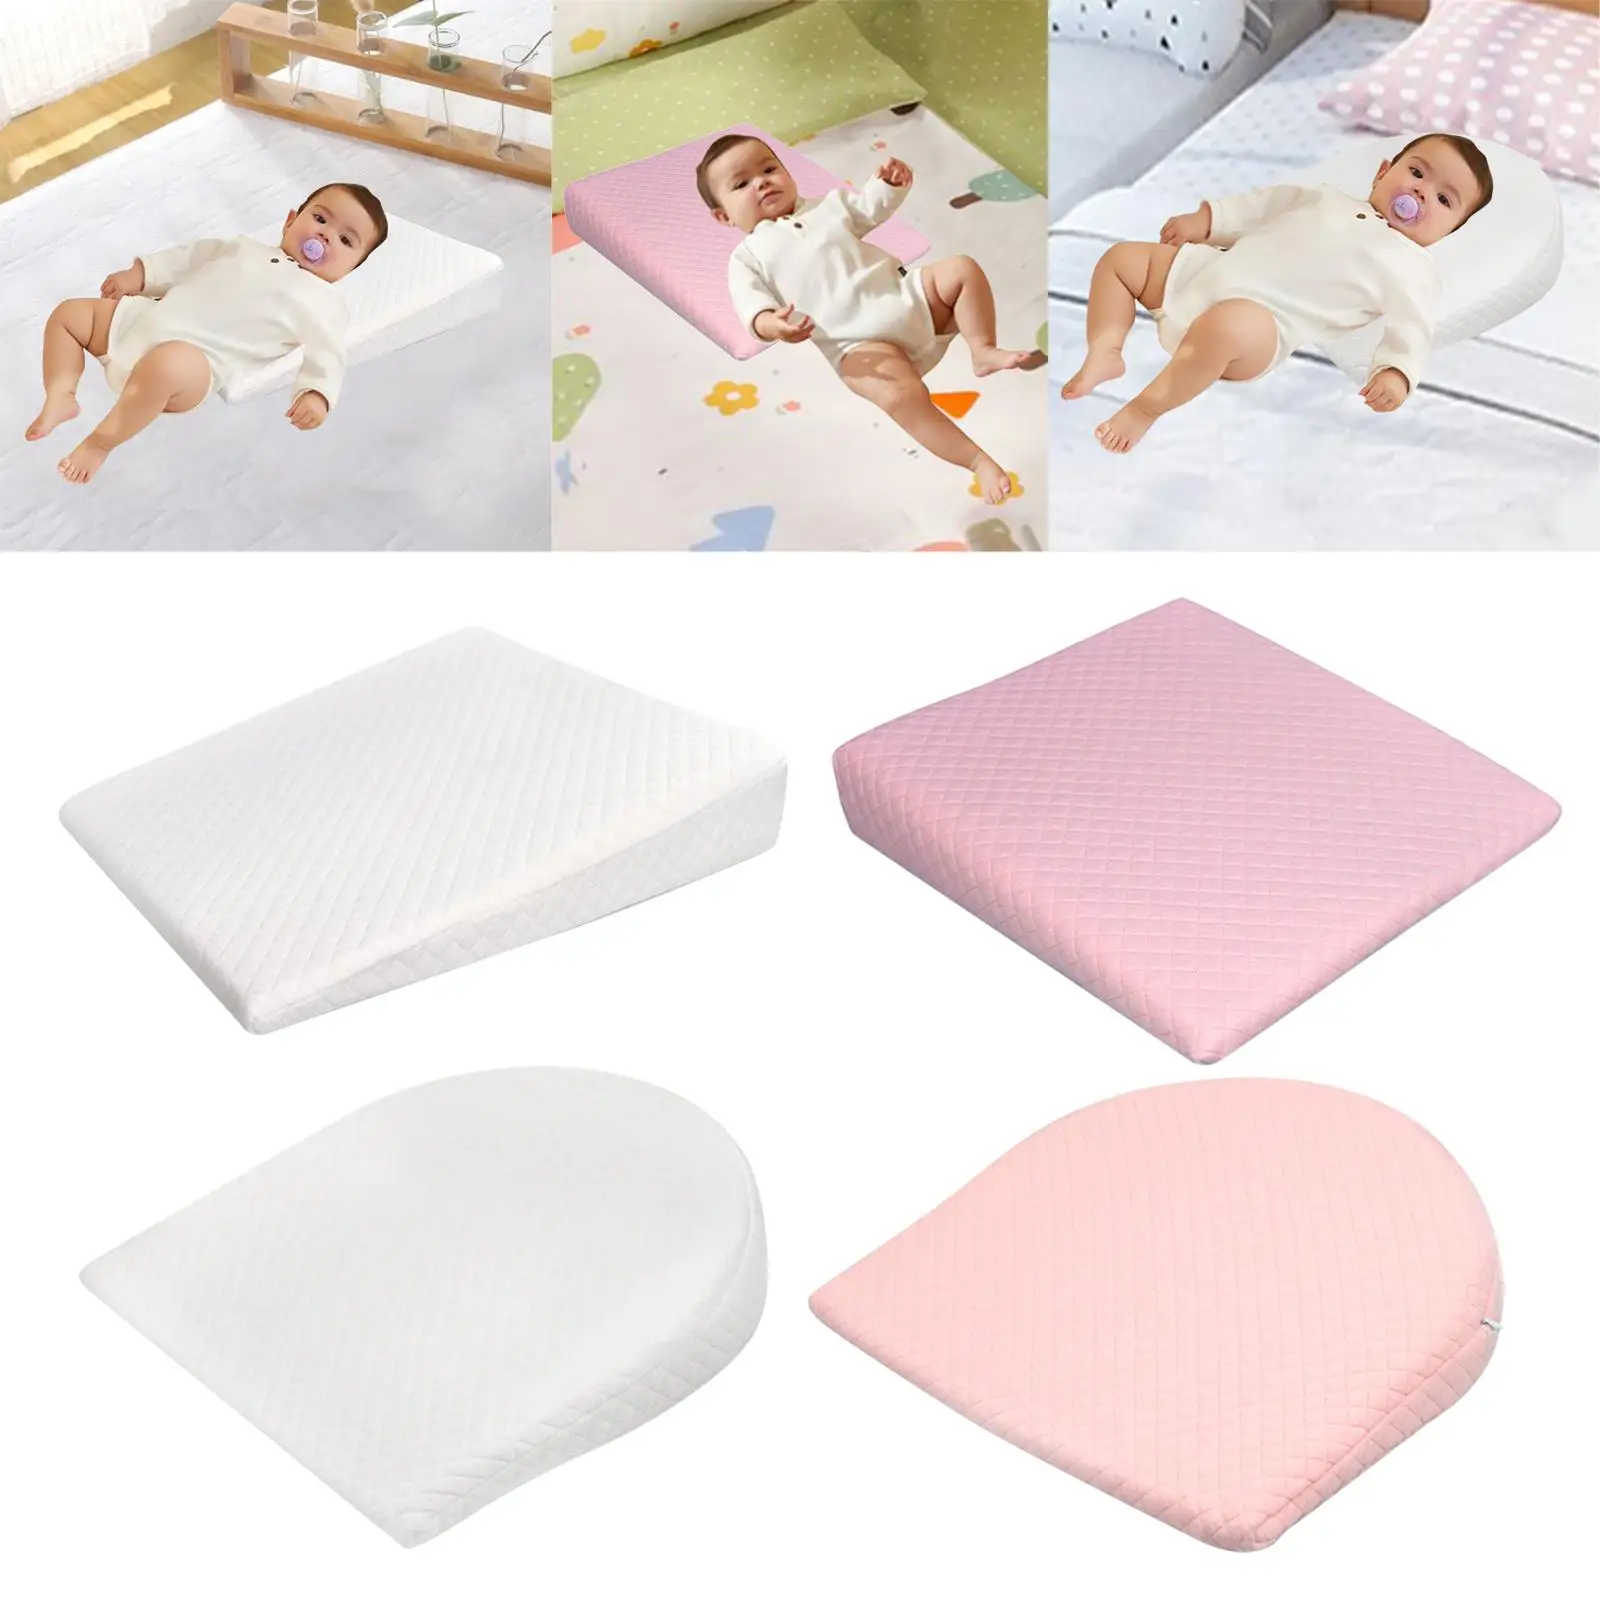 Baby Wedge Bed  sleep position Soft Cushion for Toddler Sleeping